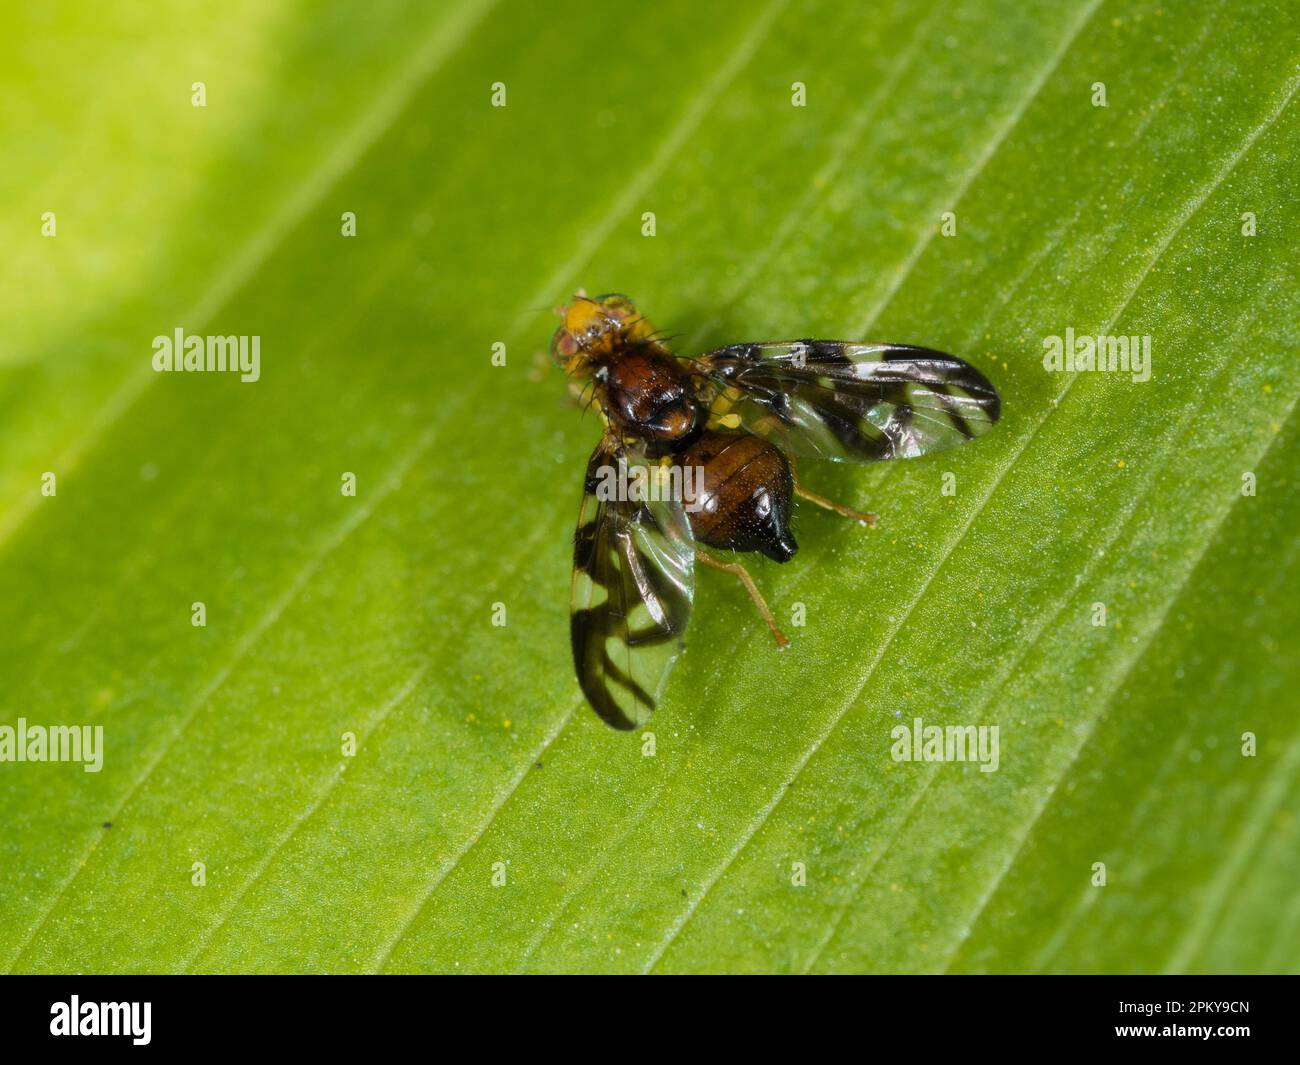 Bulbous abdomen and black patterned wings of the UK celery fly, Euleia heraclei, a leaf miner species Stock Photo